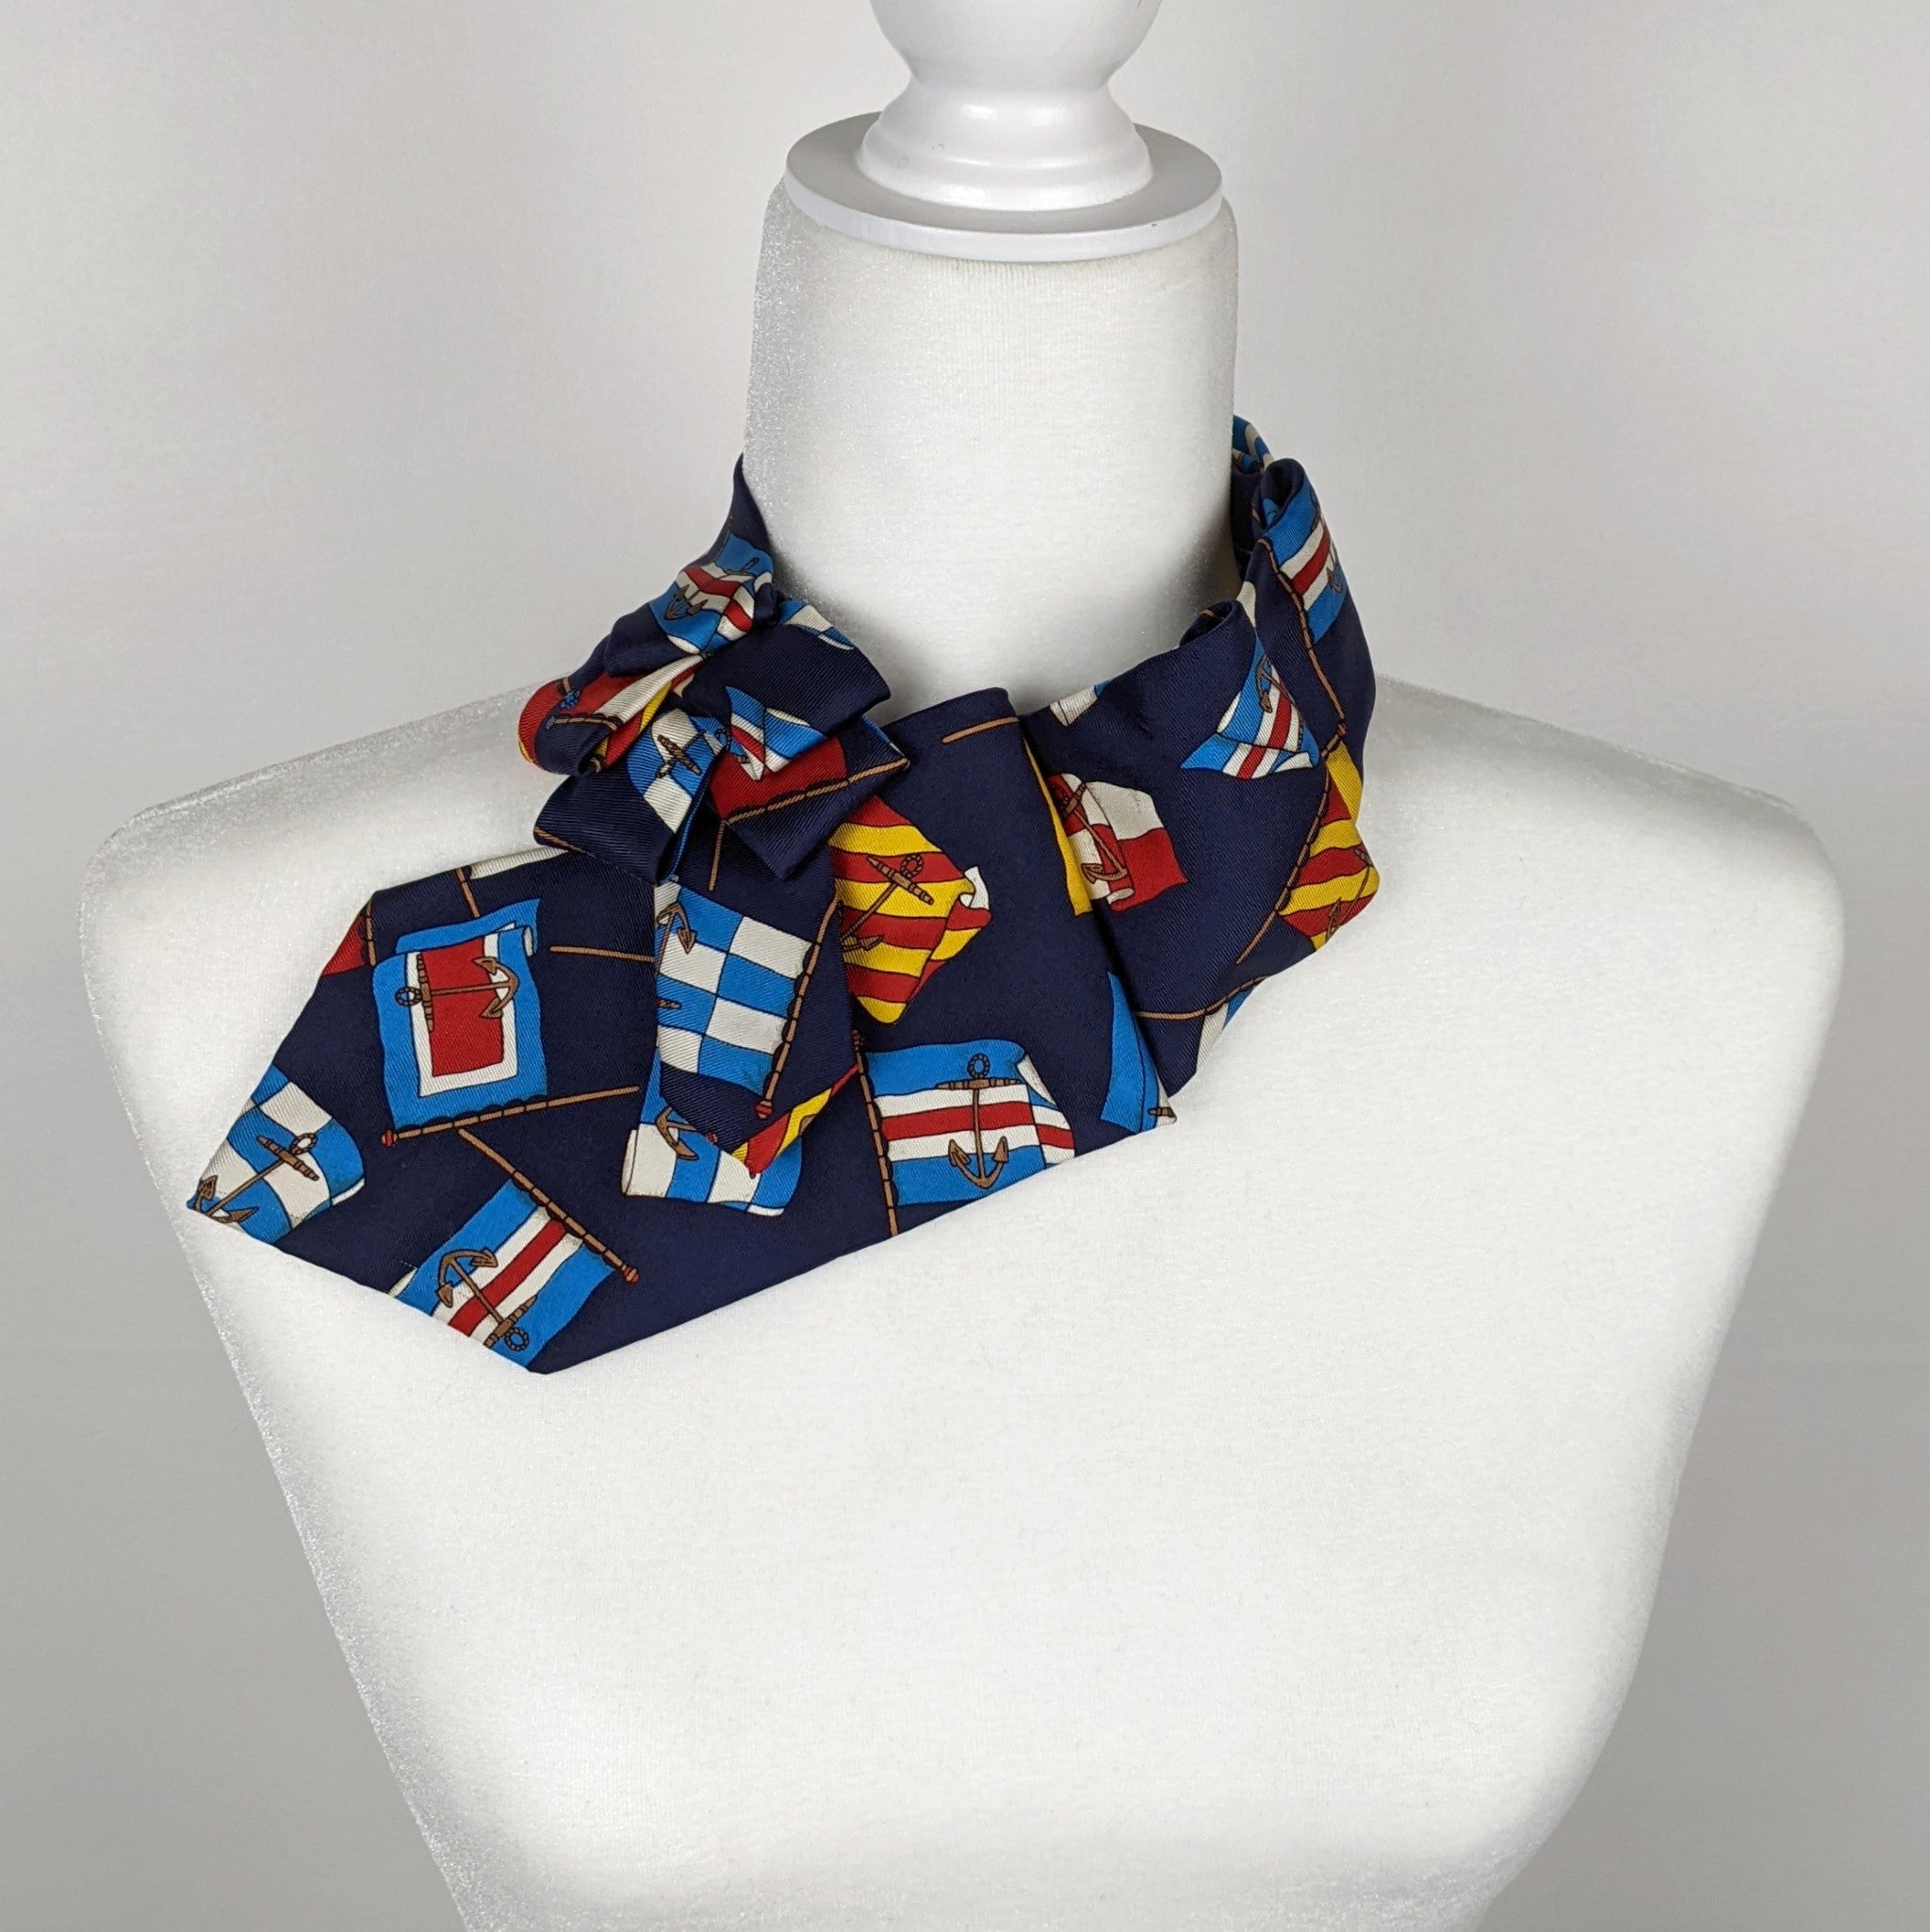 Ascot Scarf In Navy With A Nautical Flag Print.